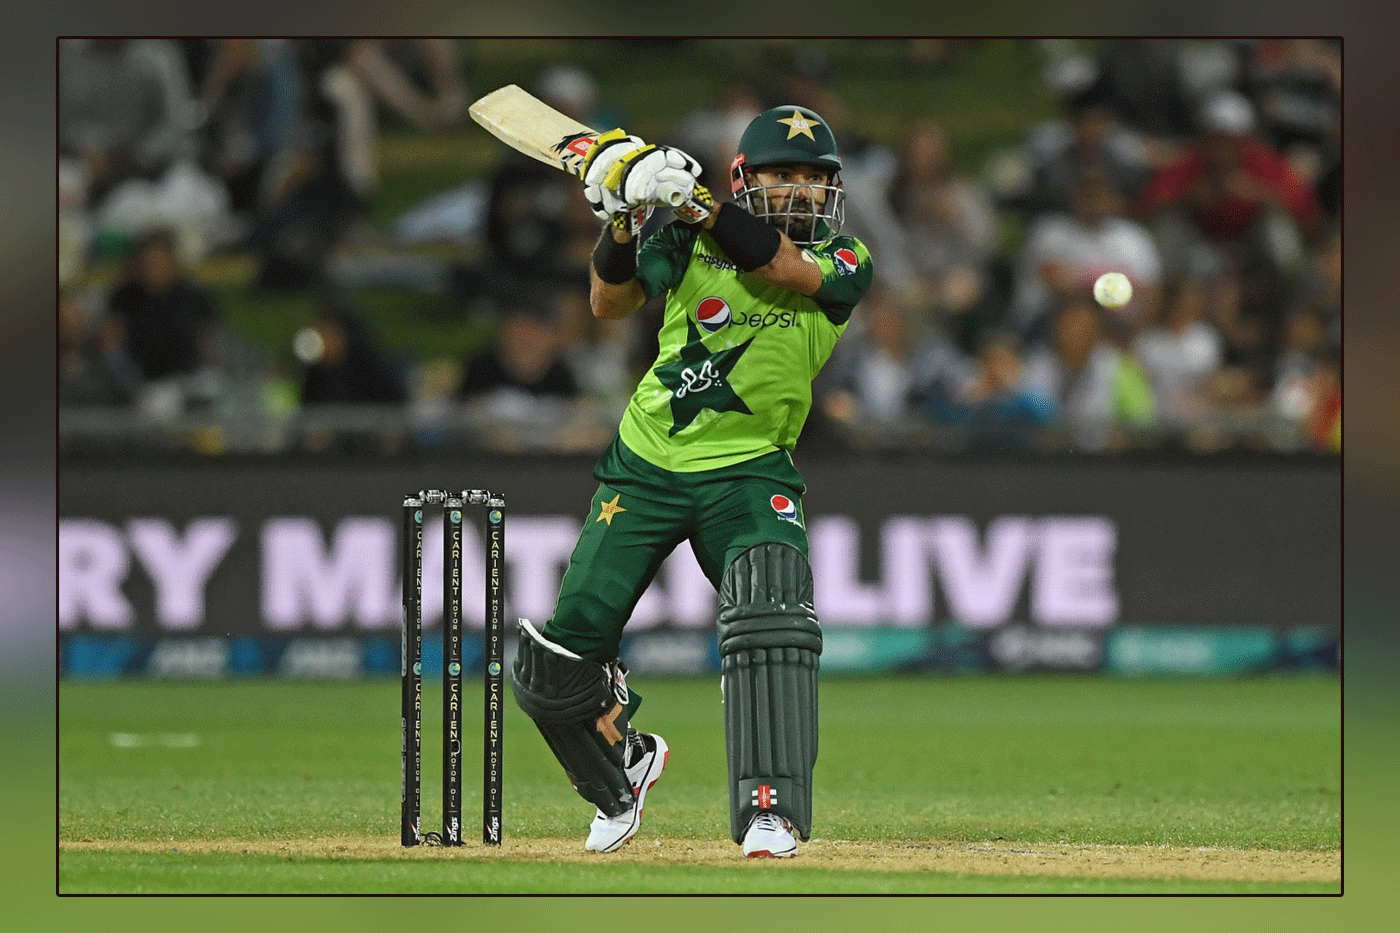 Mohammad Rizwan saved Pakistan from a clean sweep, batting brilliantly in the third T20